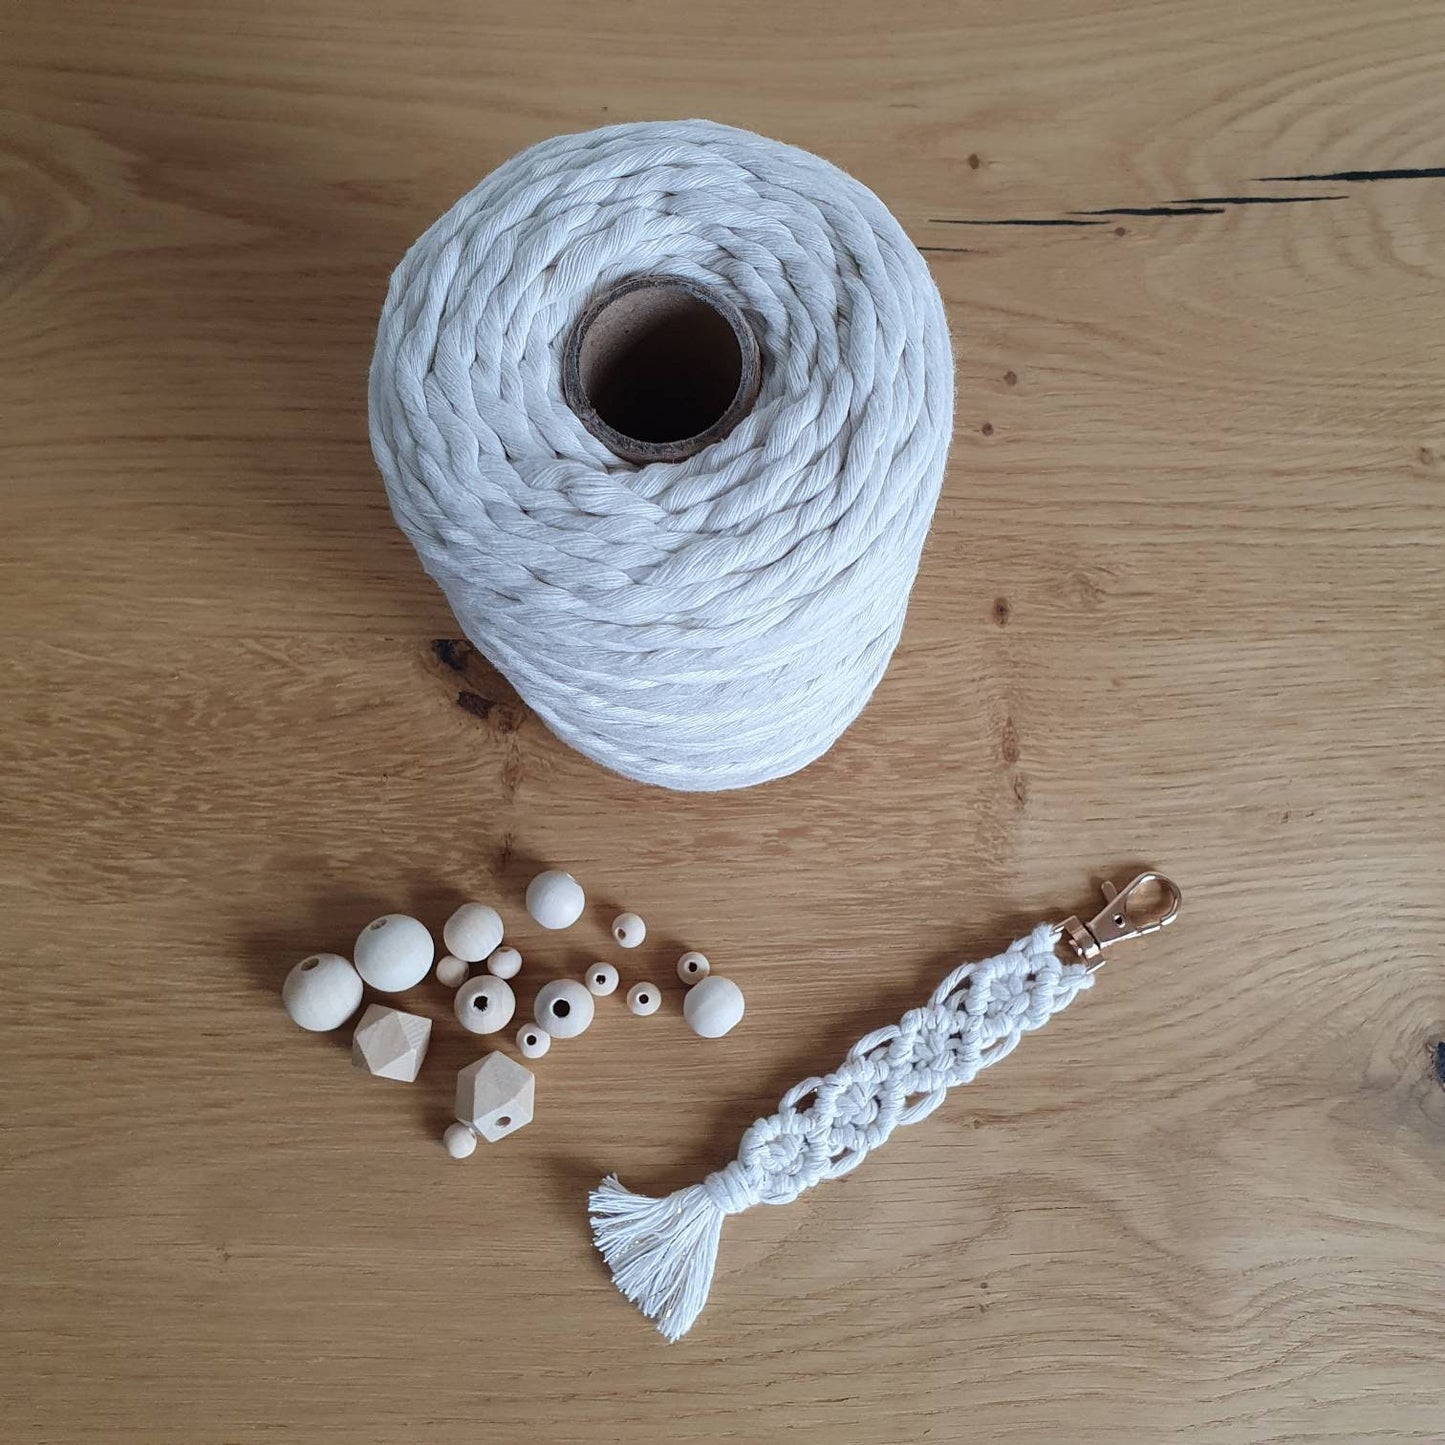 5mm Natural recycled cotton macrame cord by Bobbiny (100m)